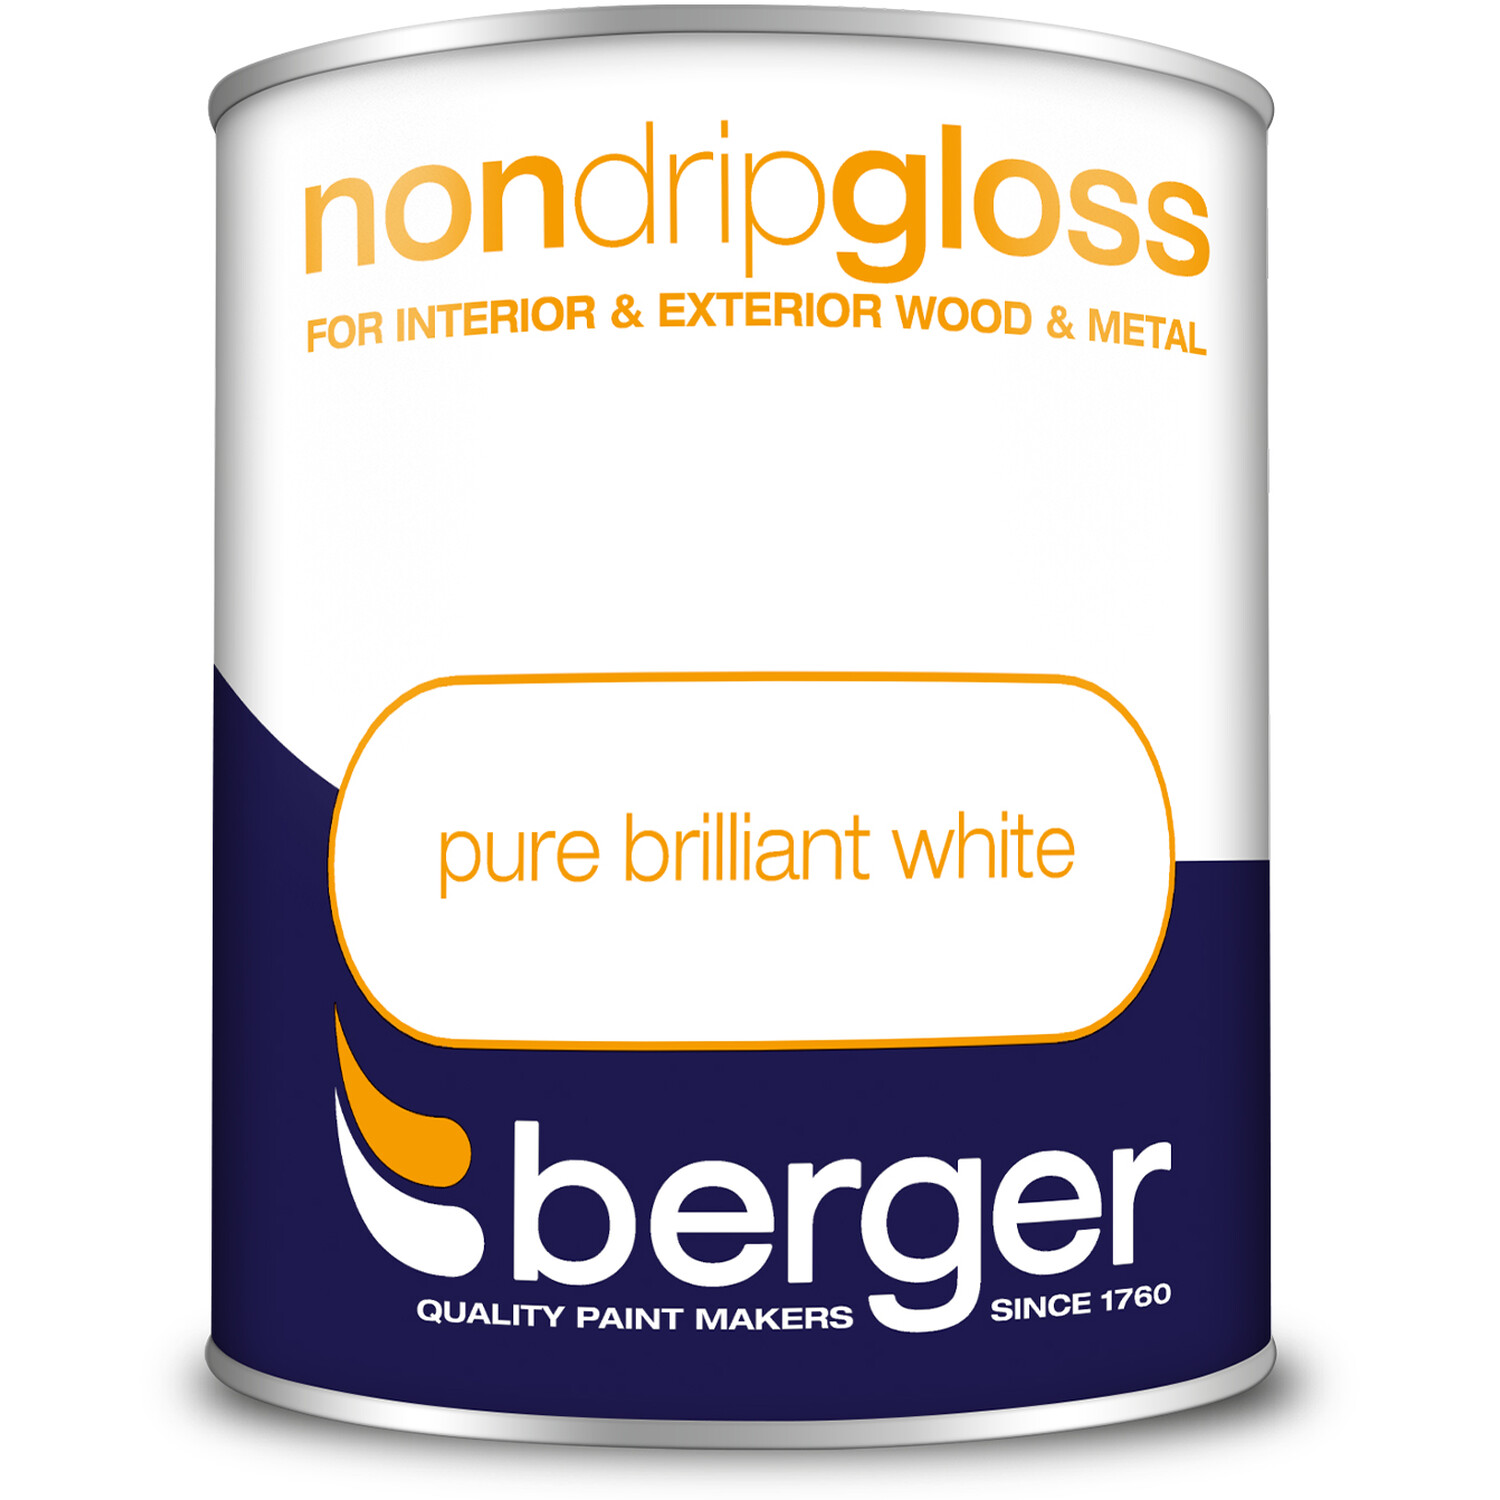 Berger Wood and Metal Pure Brilliant White Non Drip Gloss Paint Image 2